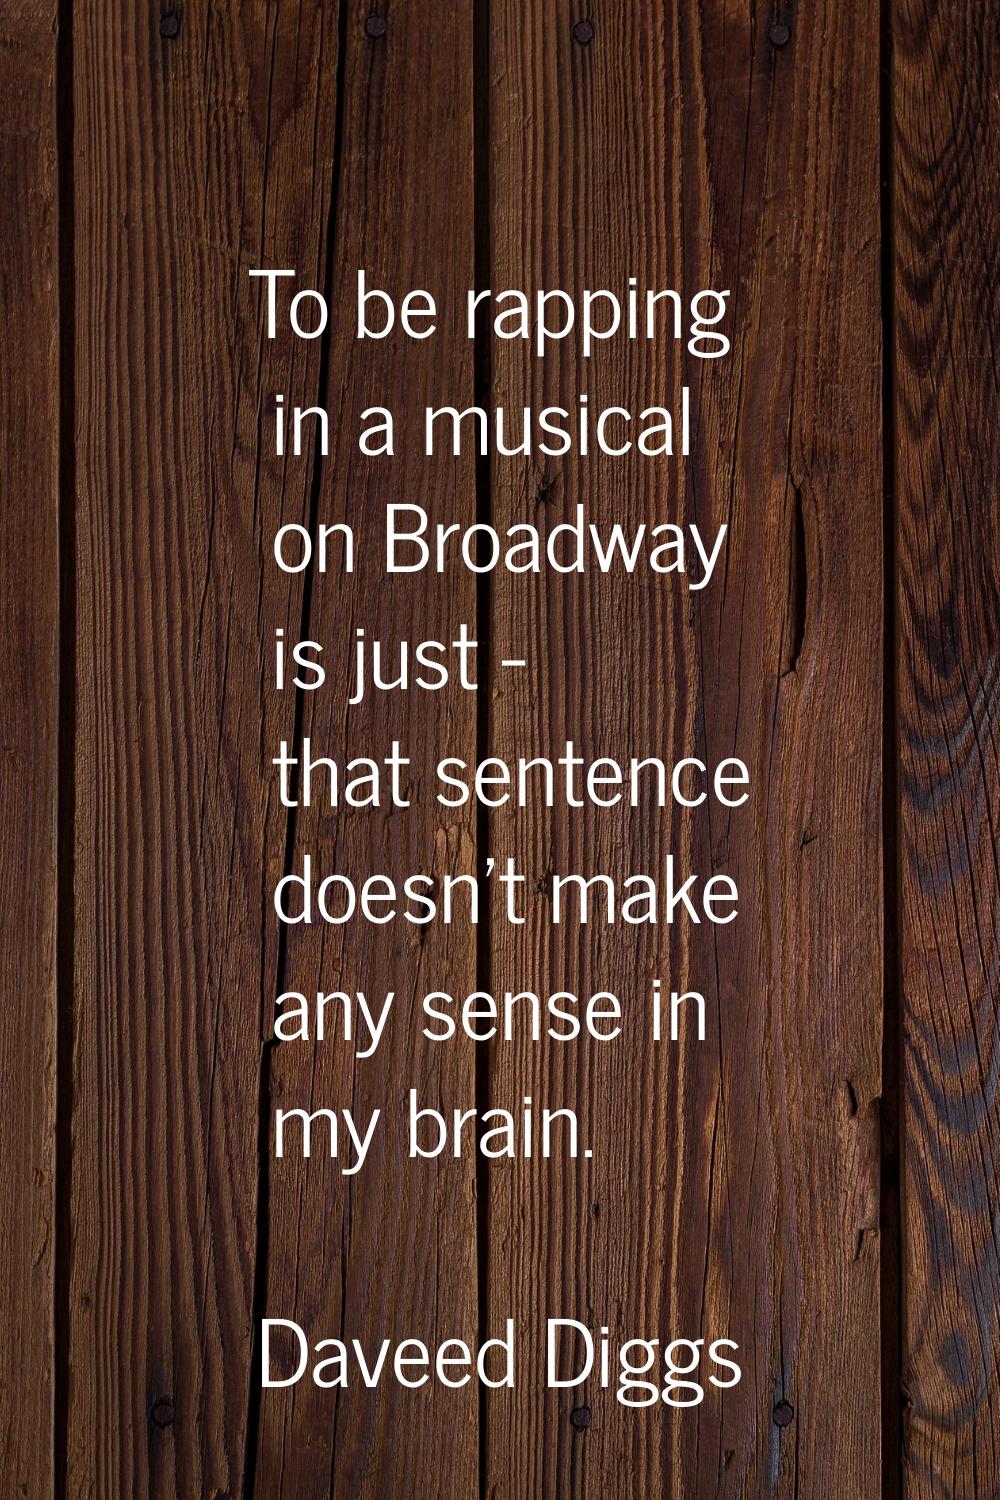 To be rapping in a musical on Broadway is just - that sentence doesn't make any sense in my brain.